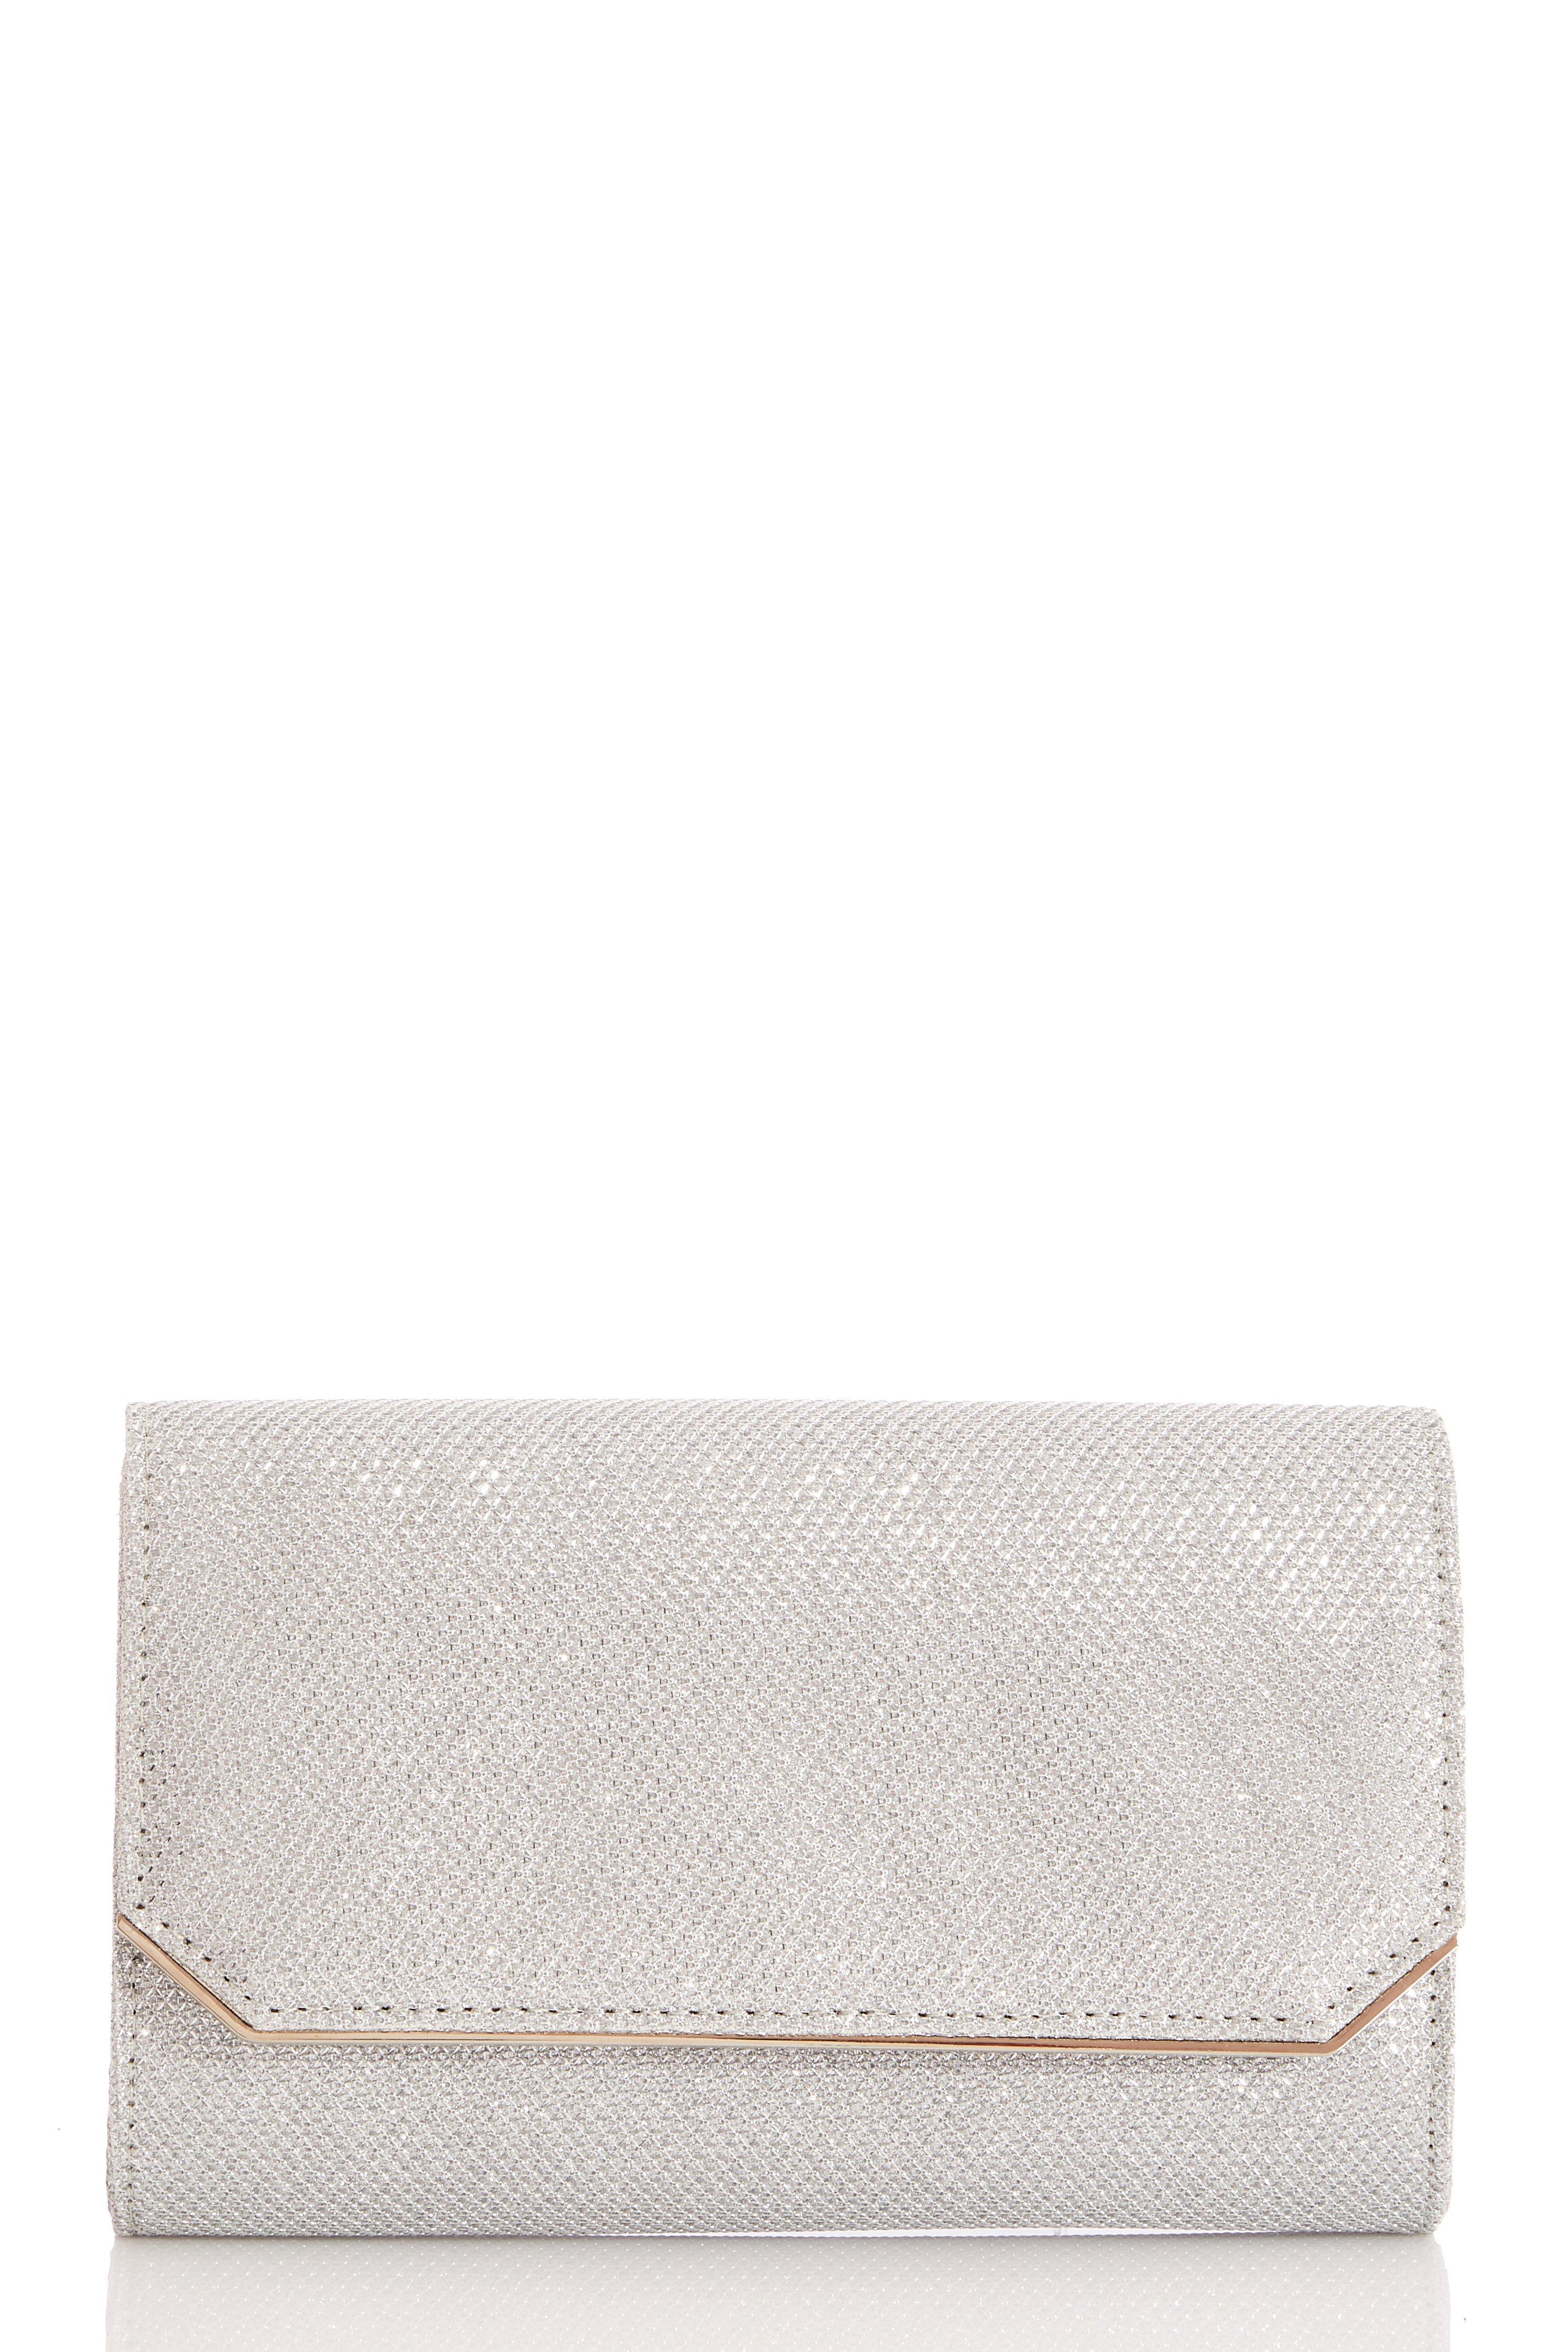 Silver Textured Shimmer Clutch Bag - Quiz Clothing